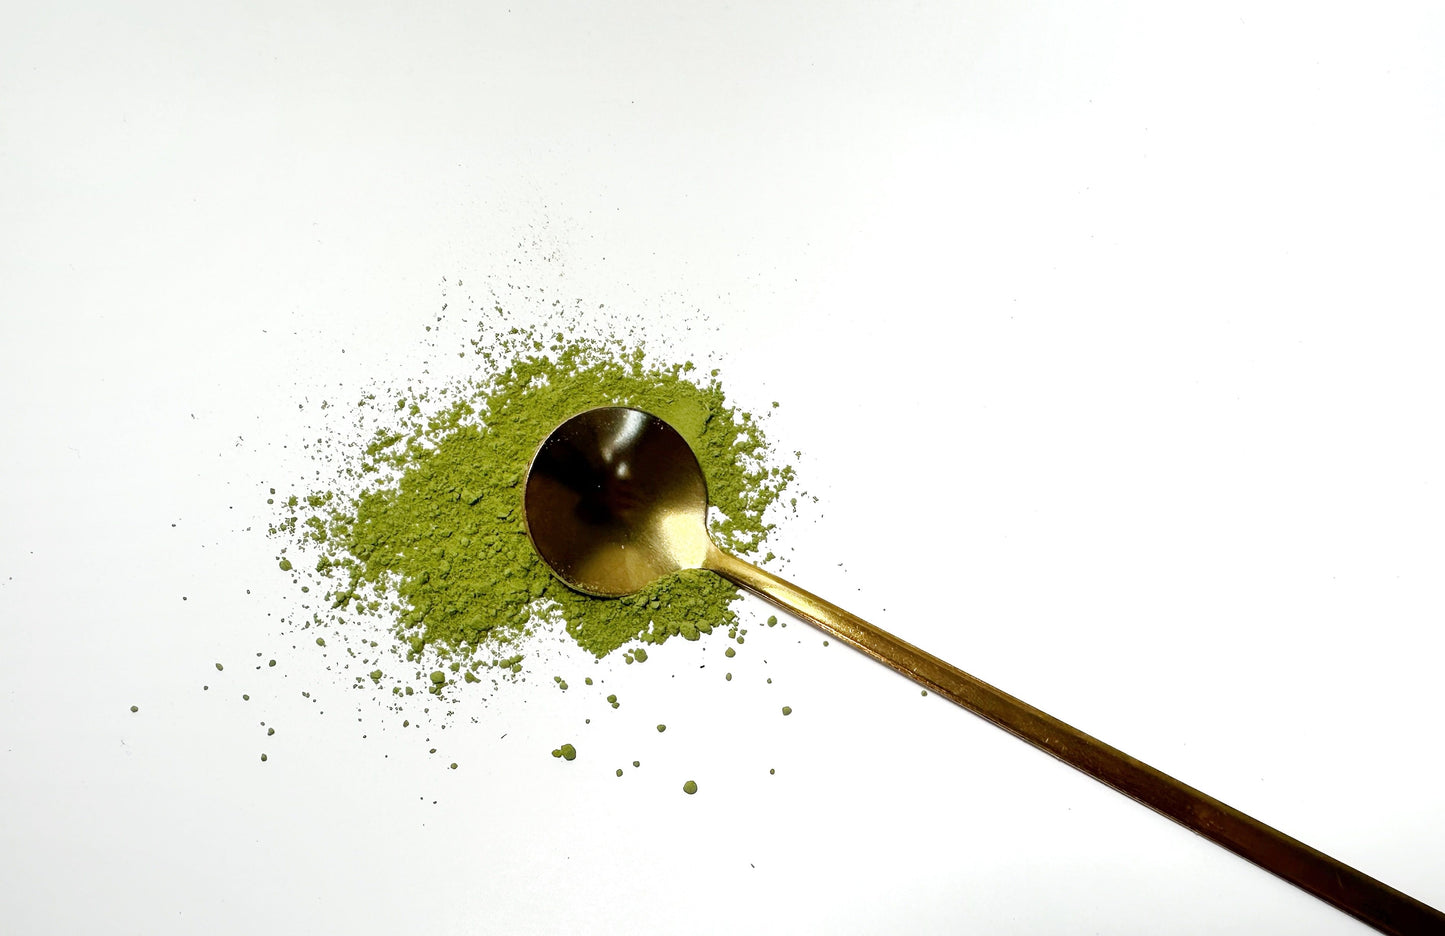 Adri Wellness's fine organic Moringa powder scattered on a white surface with a golden spoon